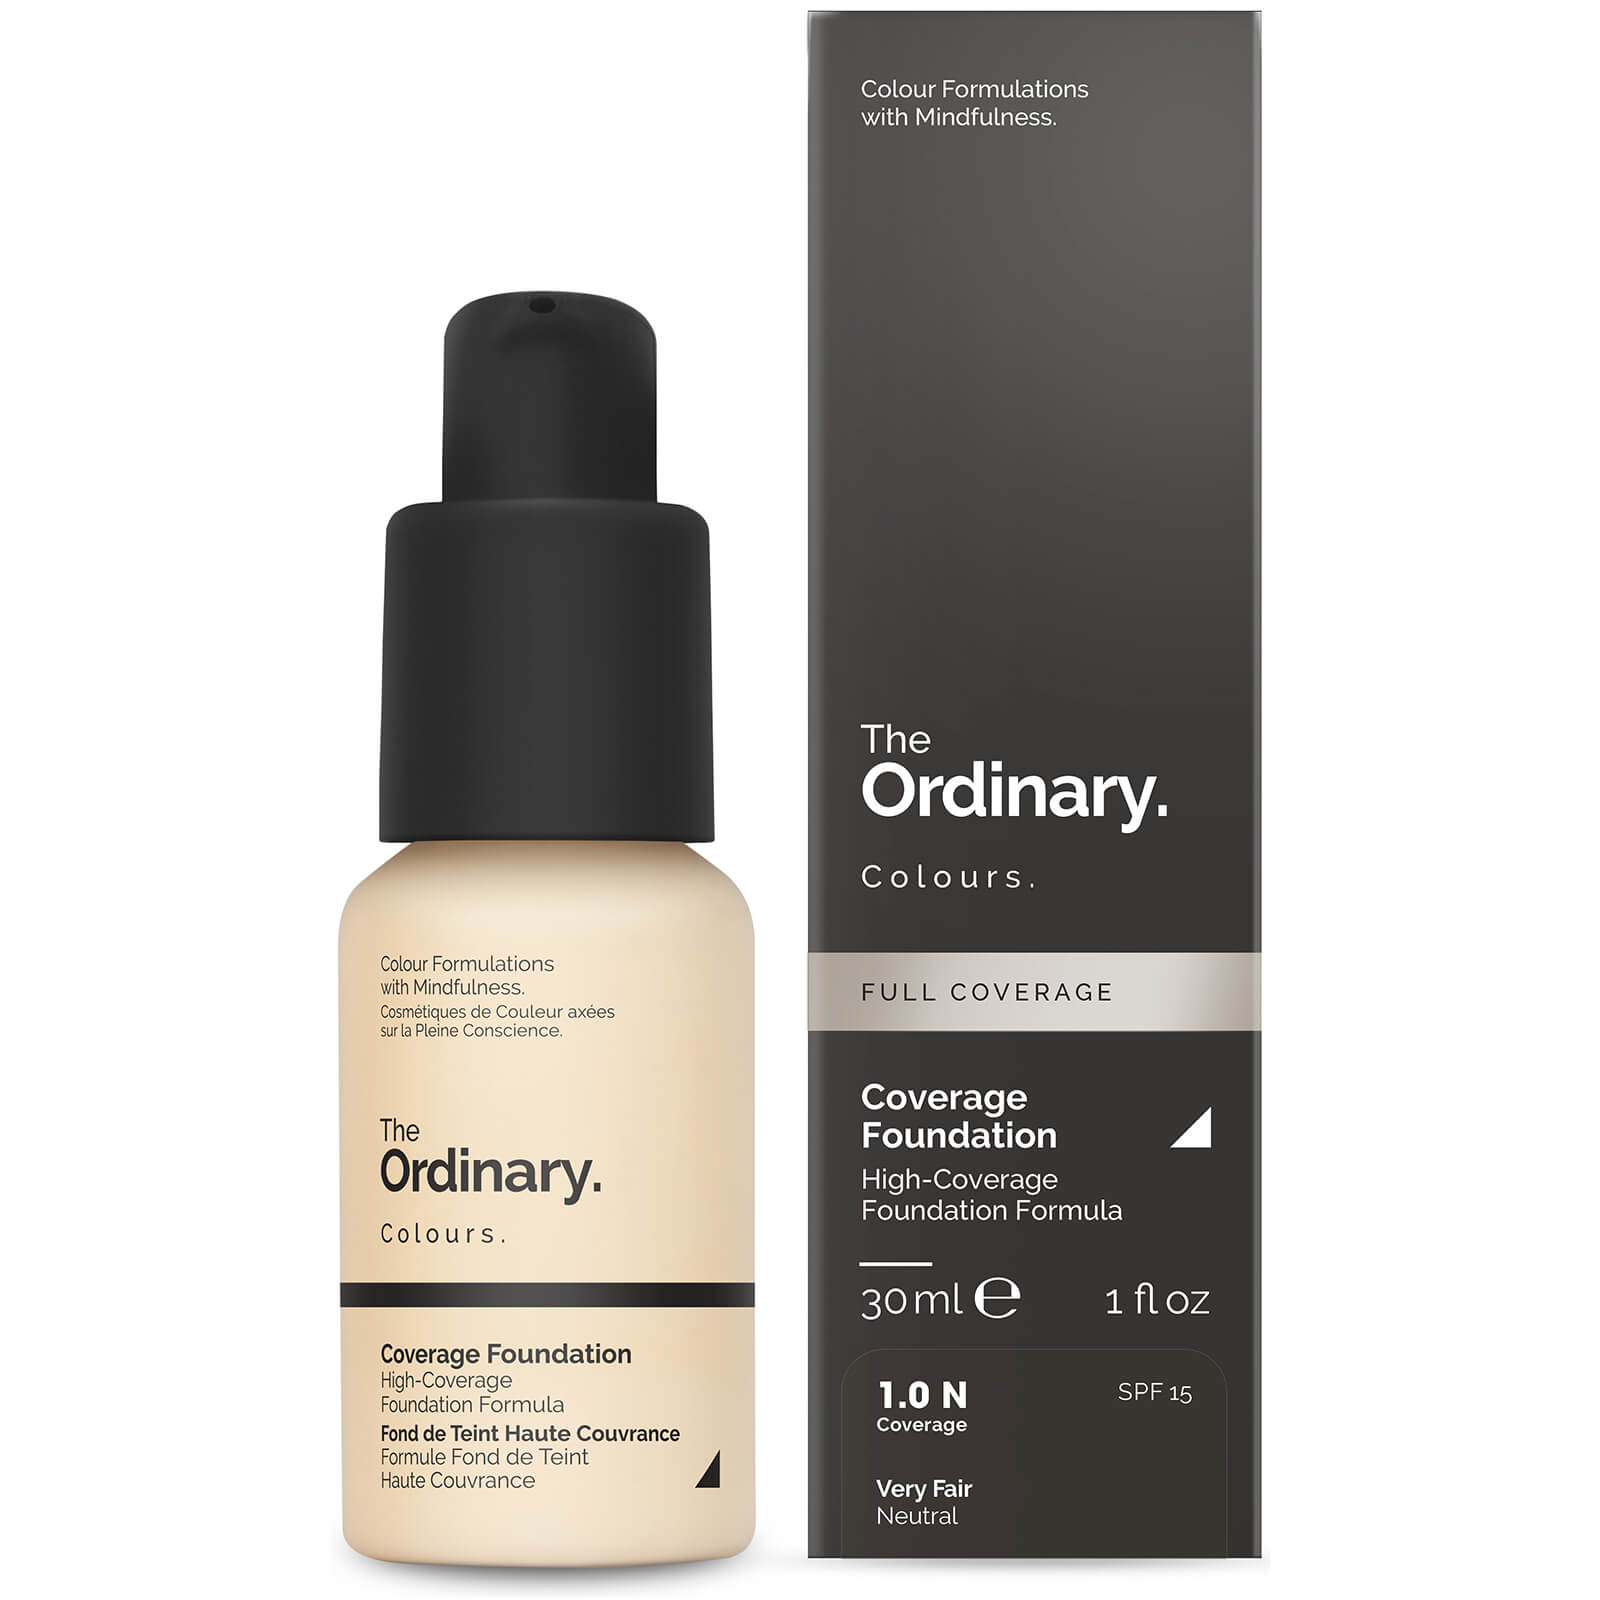 the ordinary coverage foundation with spf 15 by the ordinary colours 30ml (various shades) - 3.1y